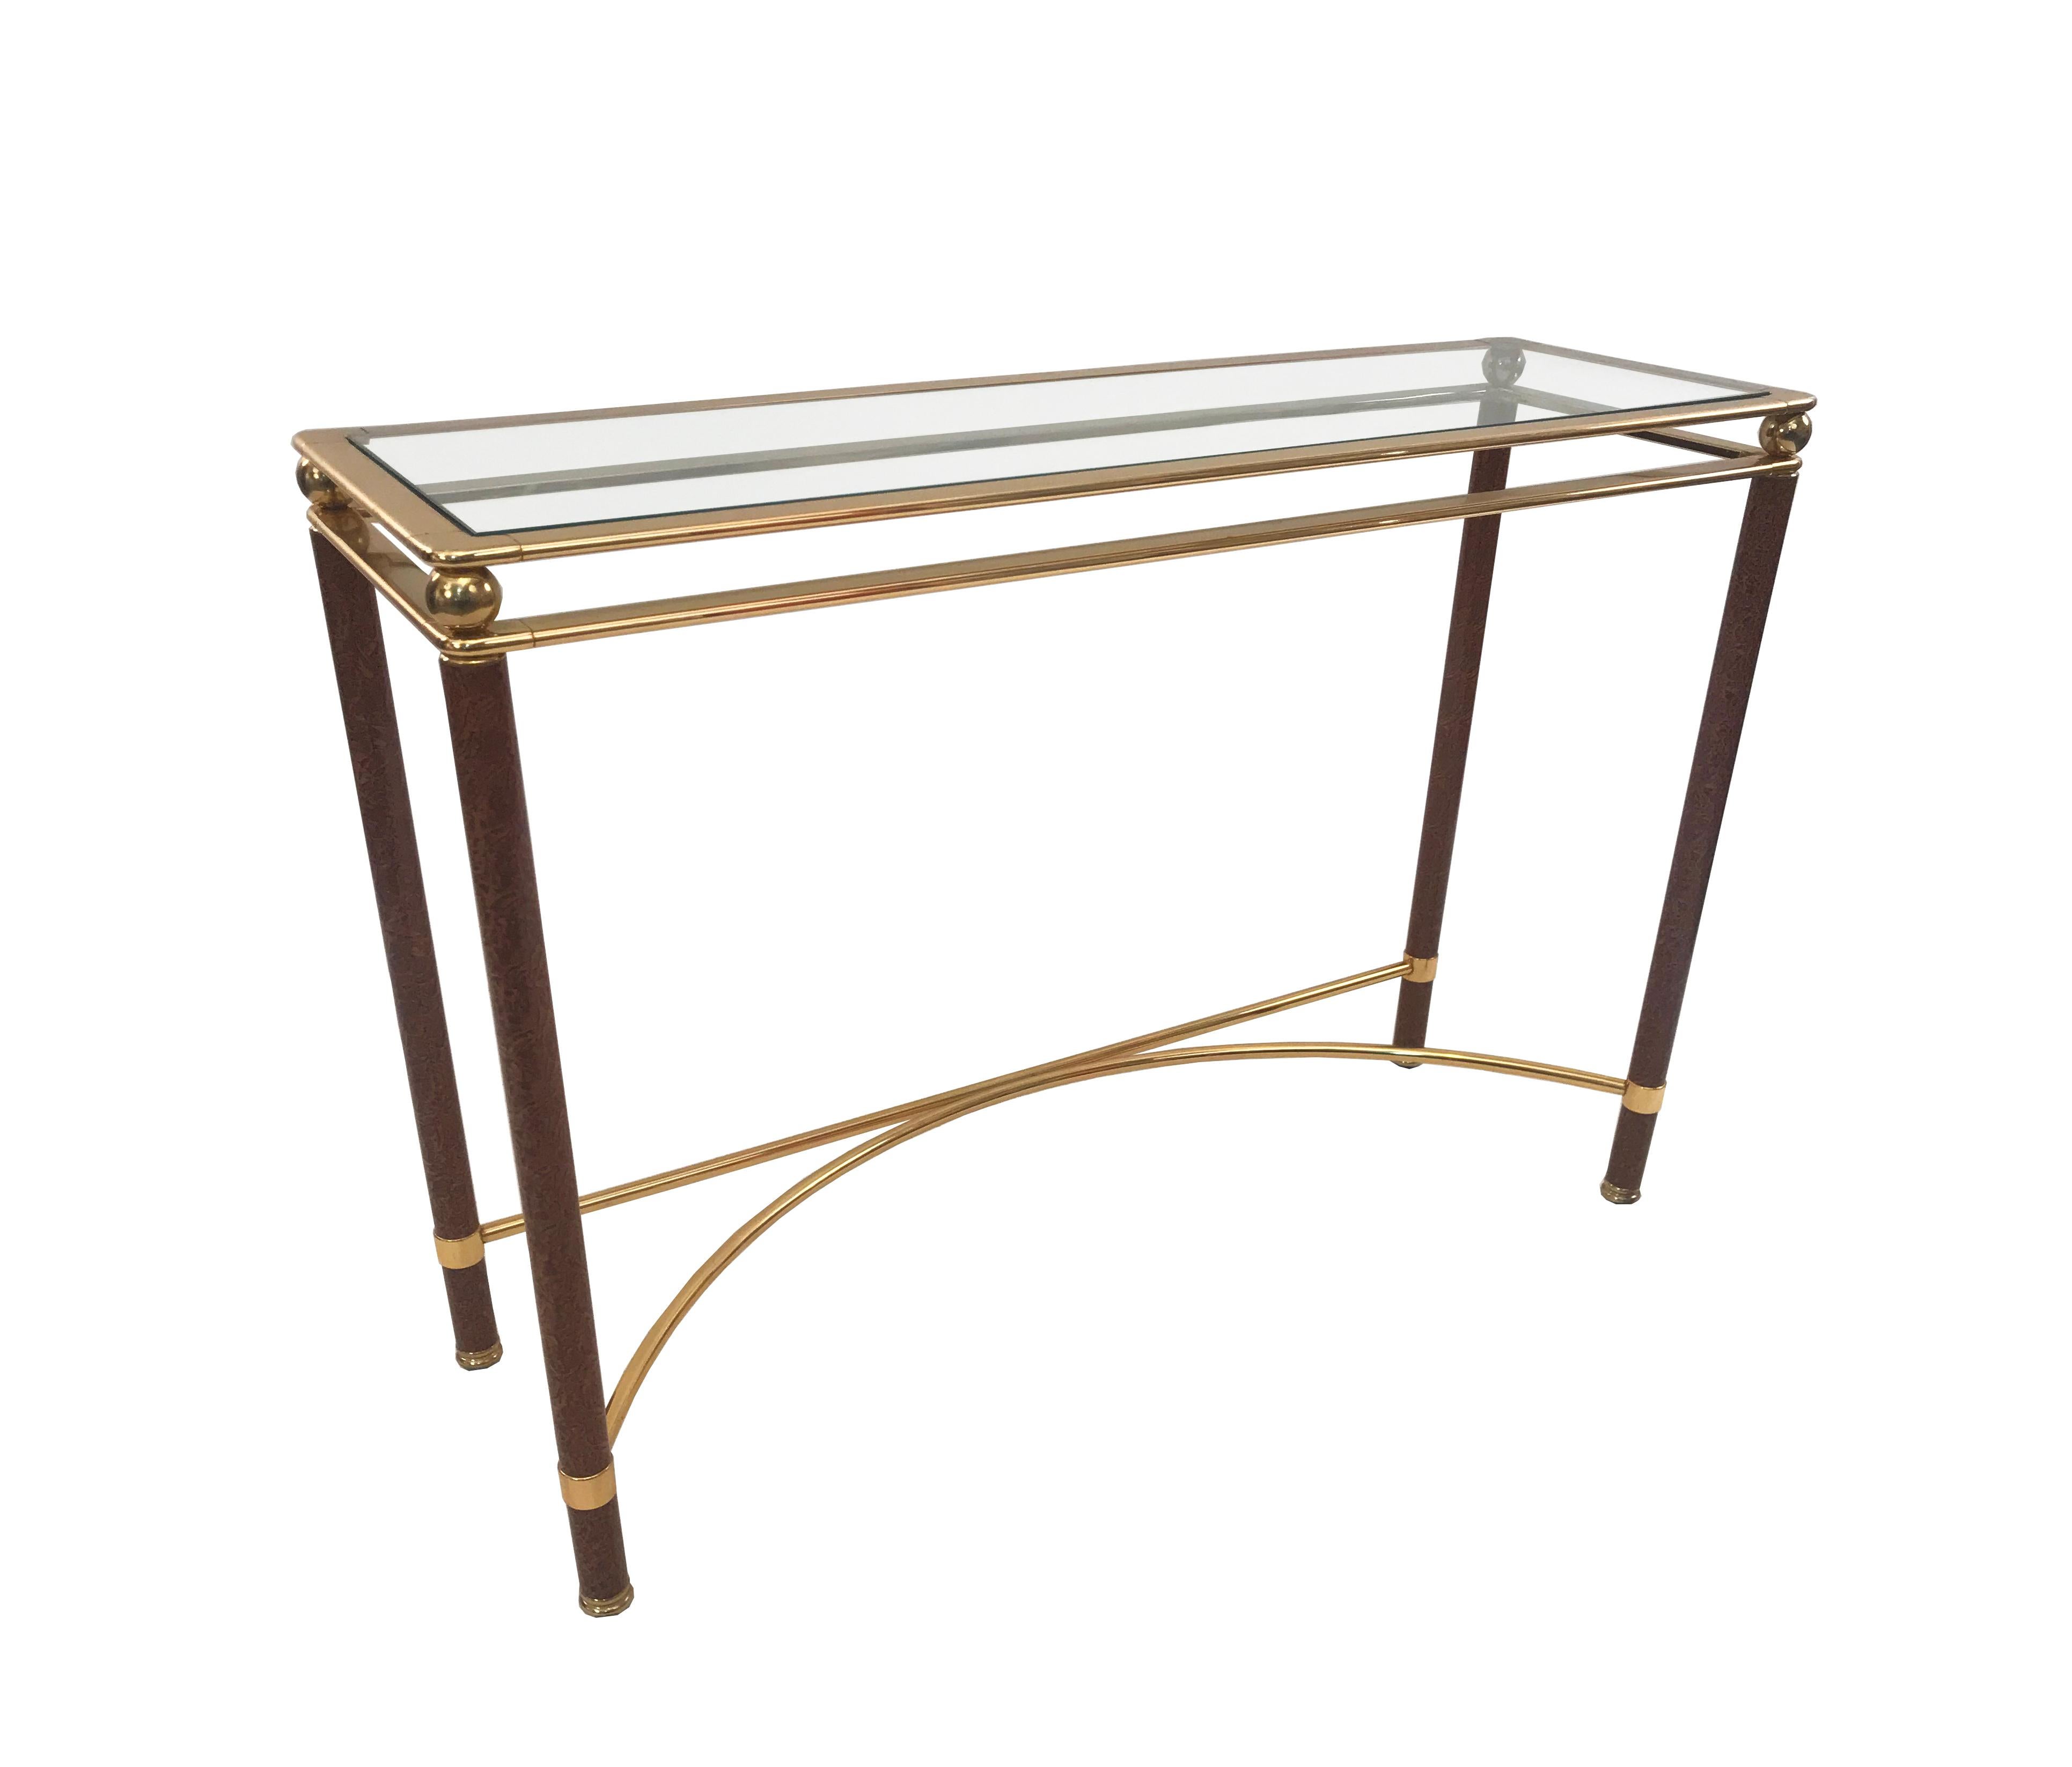 Pair of midcentury console tables with faux tortoise shell legs, brass stretchers and frames, and glass table tops.